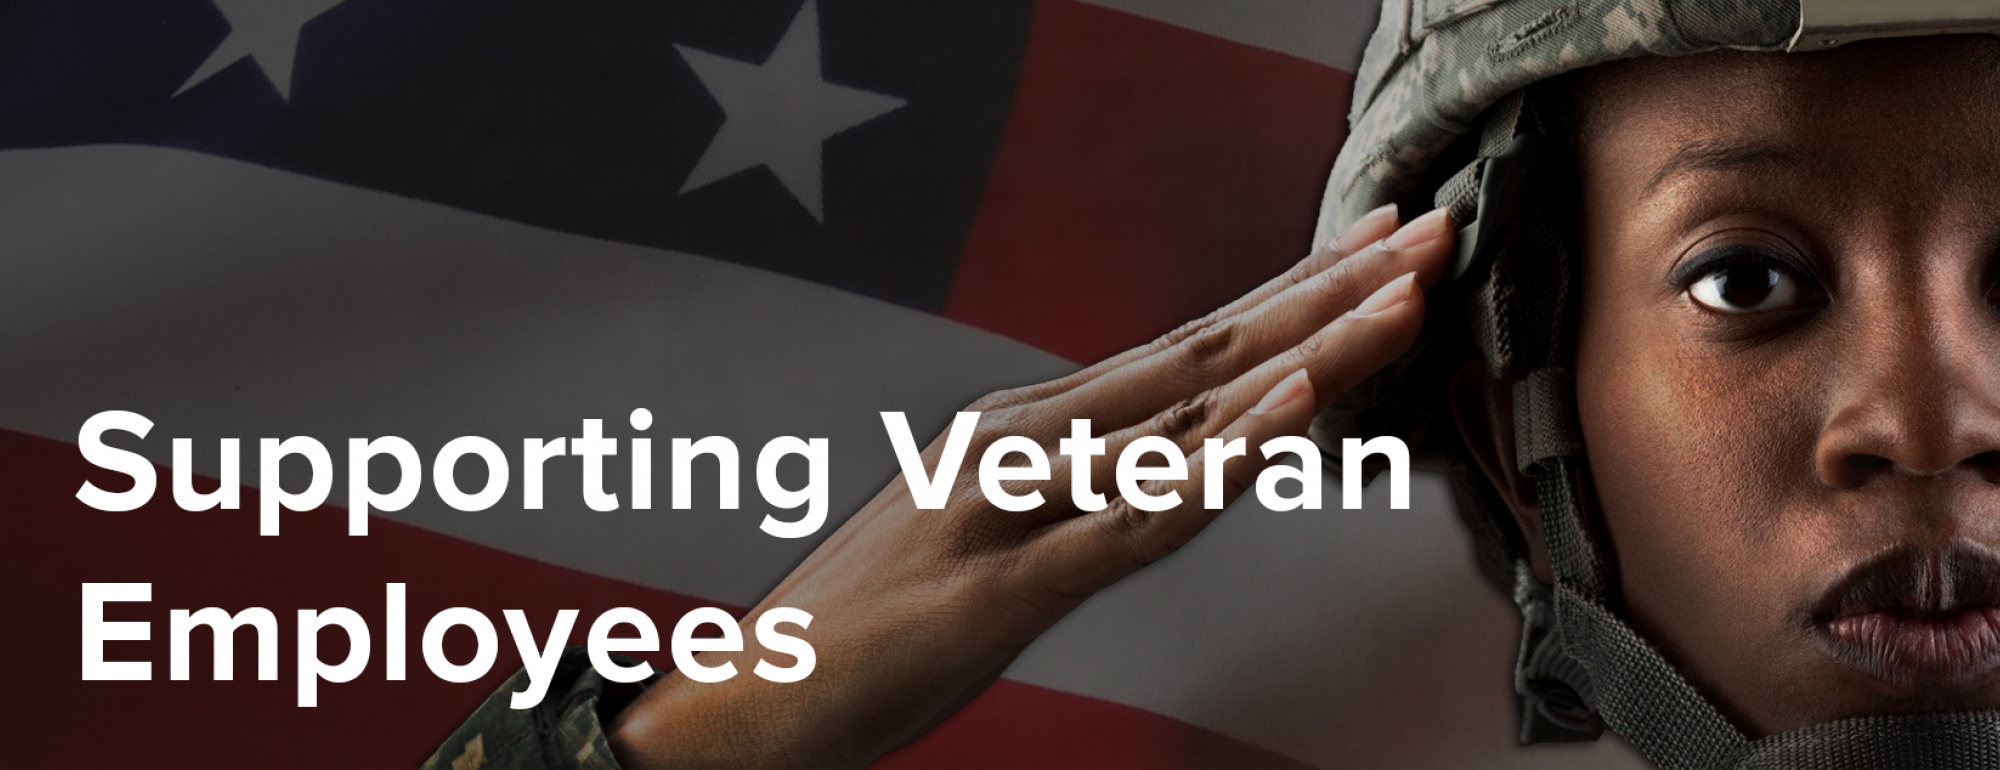 supporting veteran employees